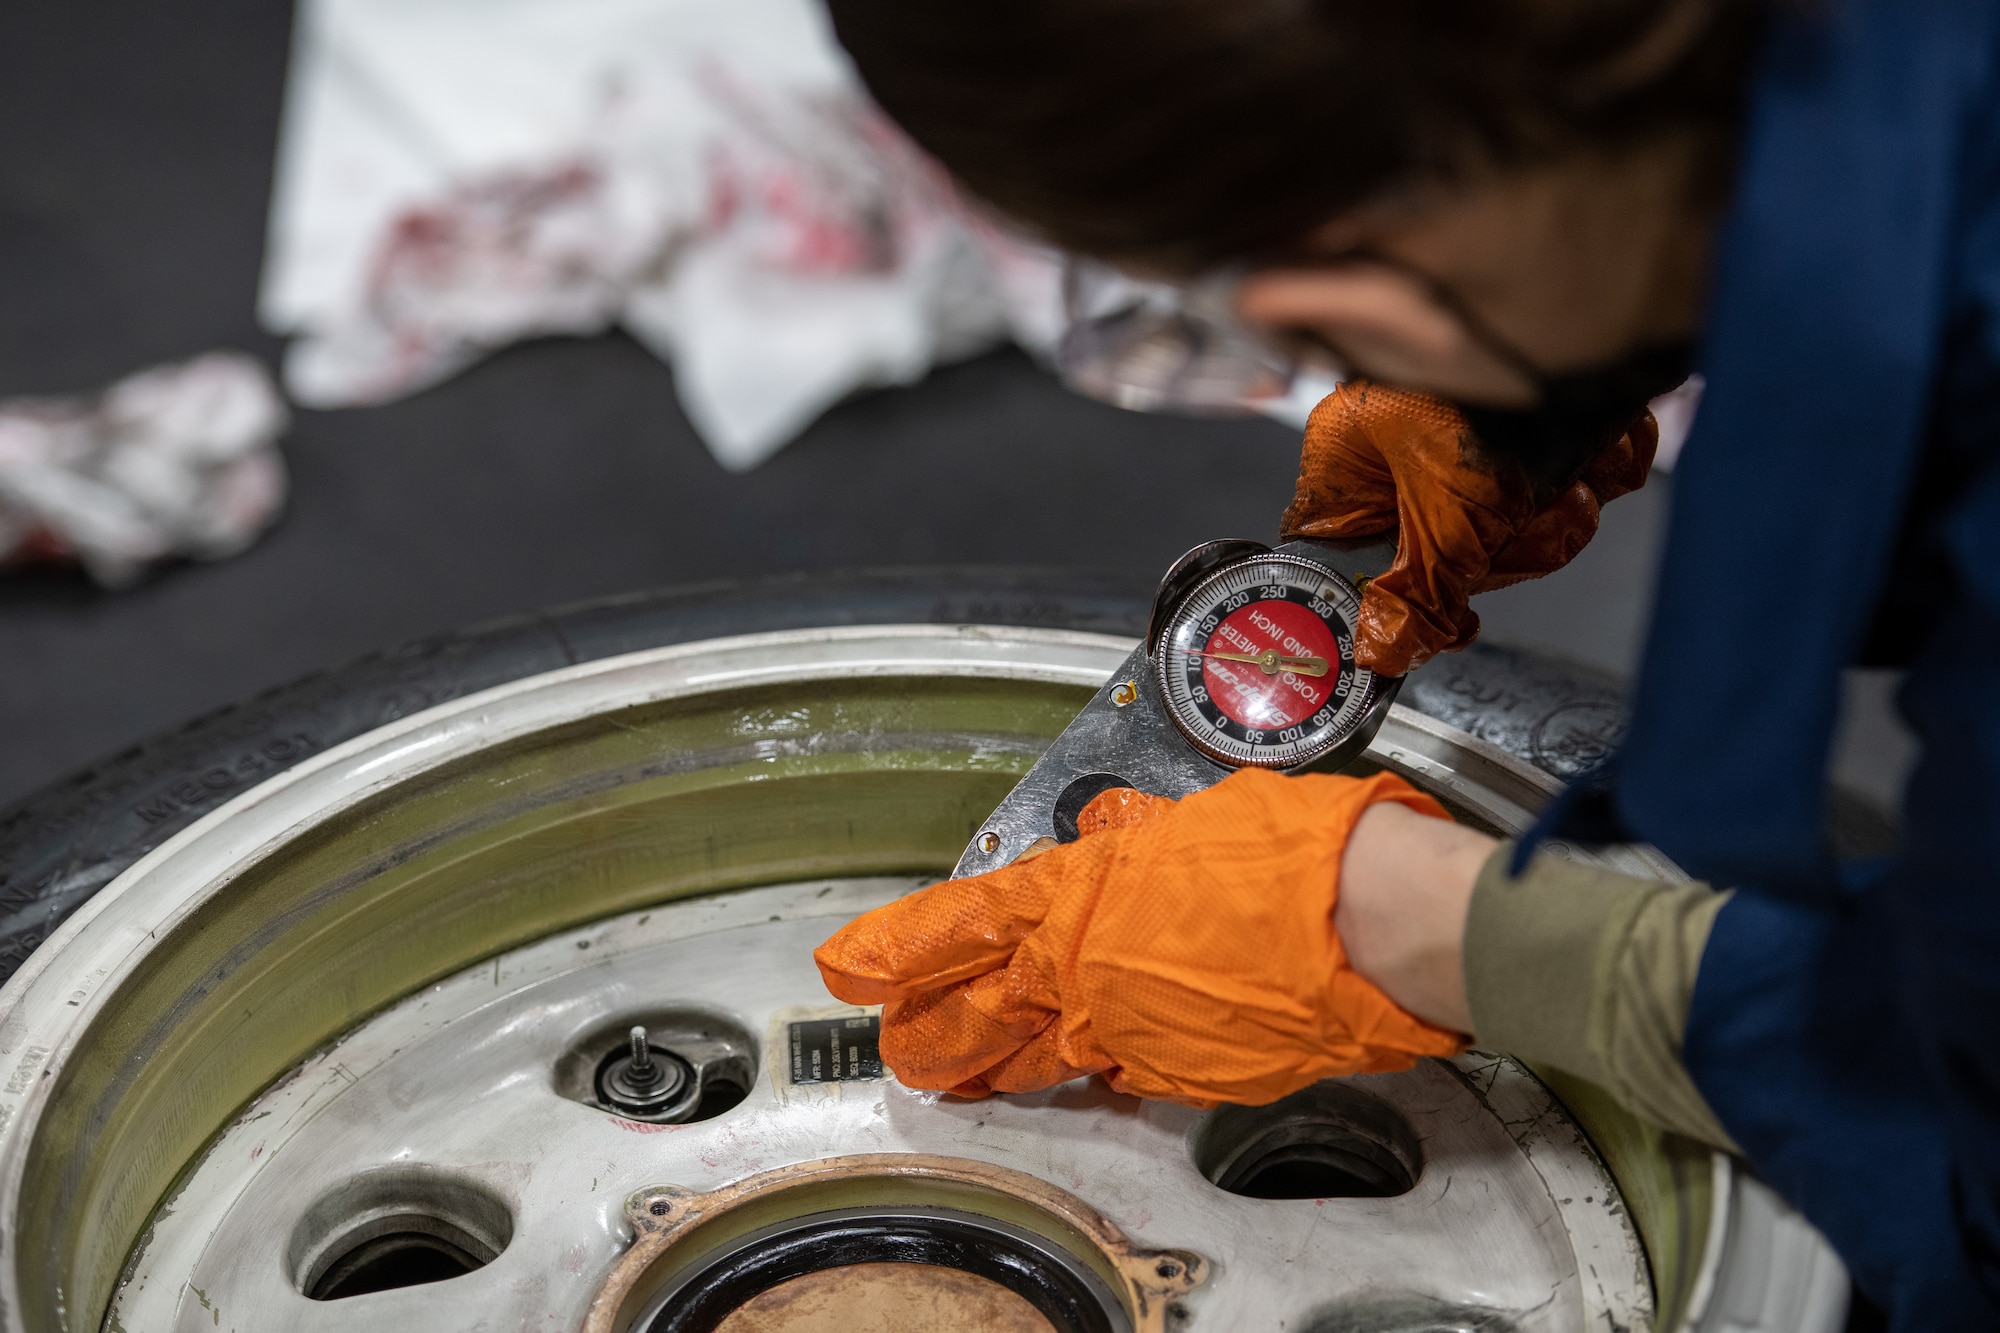 U.S. Air Force 2nd Lt. Kristin Rowe, 56th Equipment Maintenance Squadron support staff section commander, torques the valve stem on an F-35A Lightning II main wheel hub assembly Oct. 14, 2021, at Luke Air Force Base, Arizona. During the wheel and tire assembly process, Airmen will torque the valve stem 50-60 inch pounds, to ensure there is a tight seal and no air loss on the tire. The wheel and tire shop provides essential and reliable aircraft parts for the F-35A and F-16 Fighting Falcon, supporting the world’s greatest fighter pilots and combat-ready Airmen. (U.S. Air Force photo by Staff Sgt. Collette Brooks)